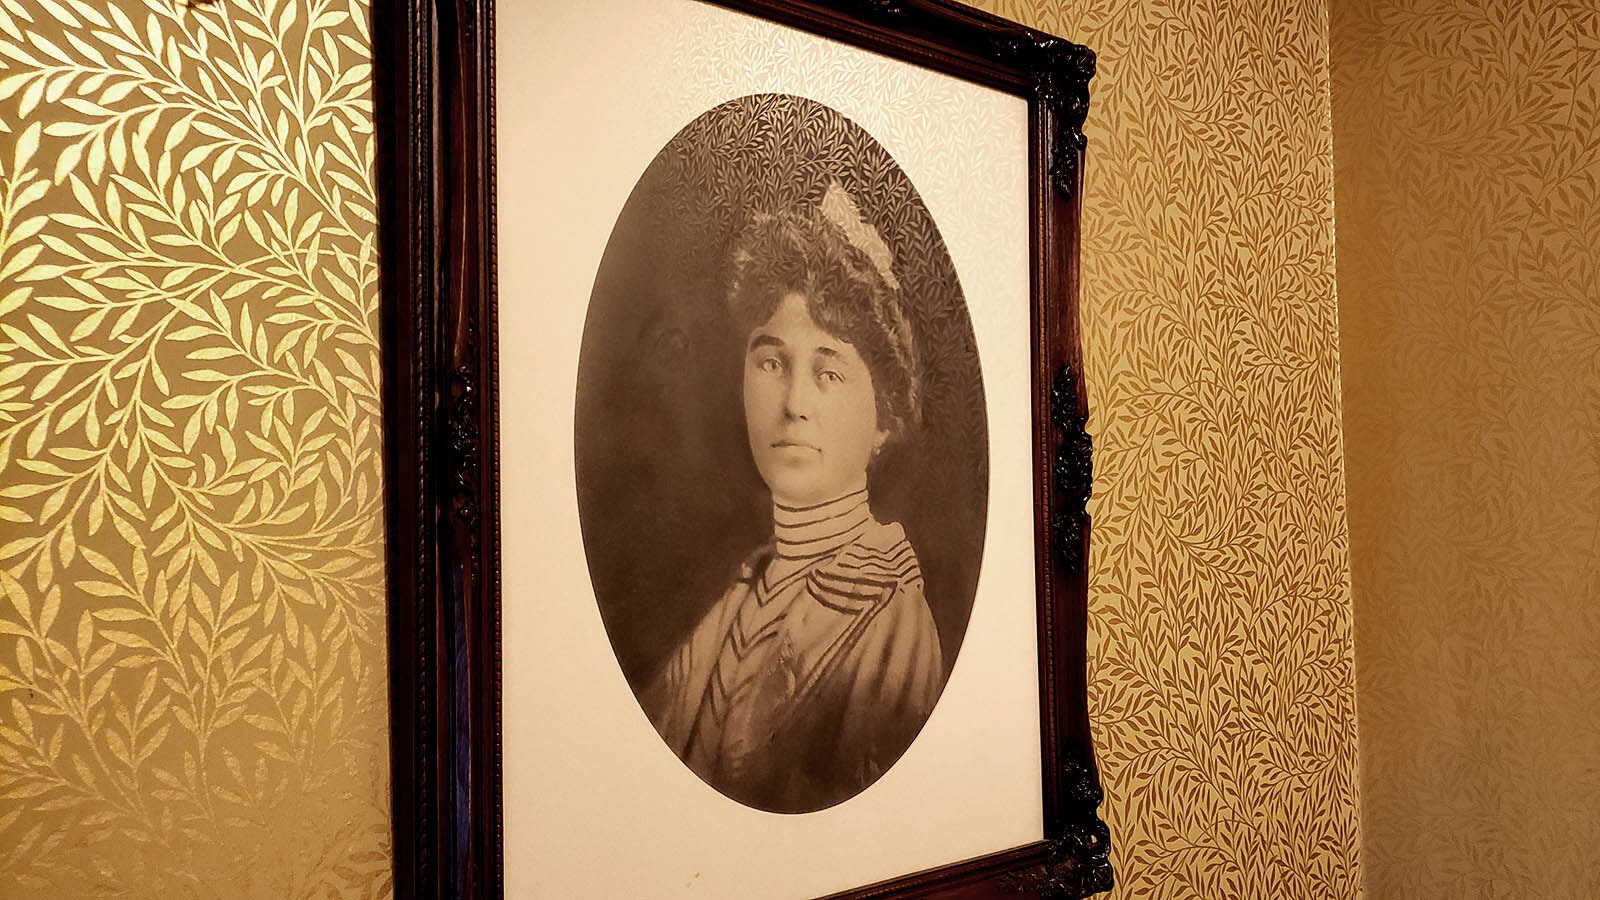 Miss Kate, whose ashes were placed behind a wall at the Sheridan Inn, is said to haunt the hotel, which is one of five Wyoming hotels sociology researcher Debbie Cobb is studying as part of her degree program at UW.